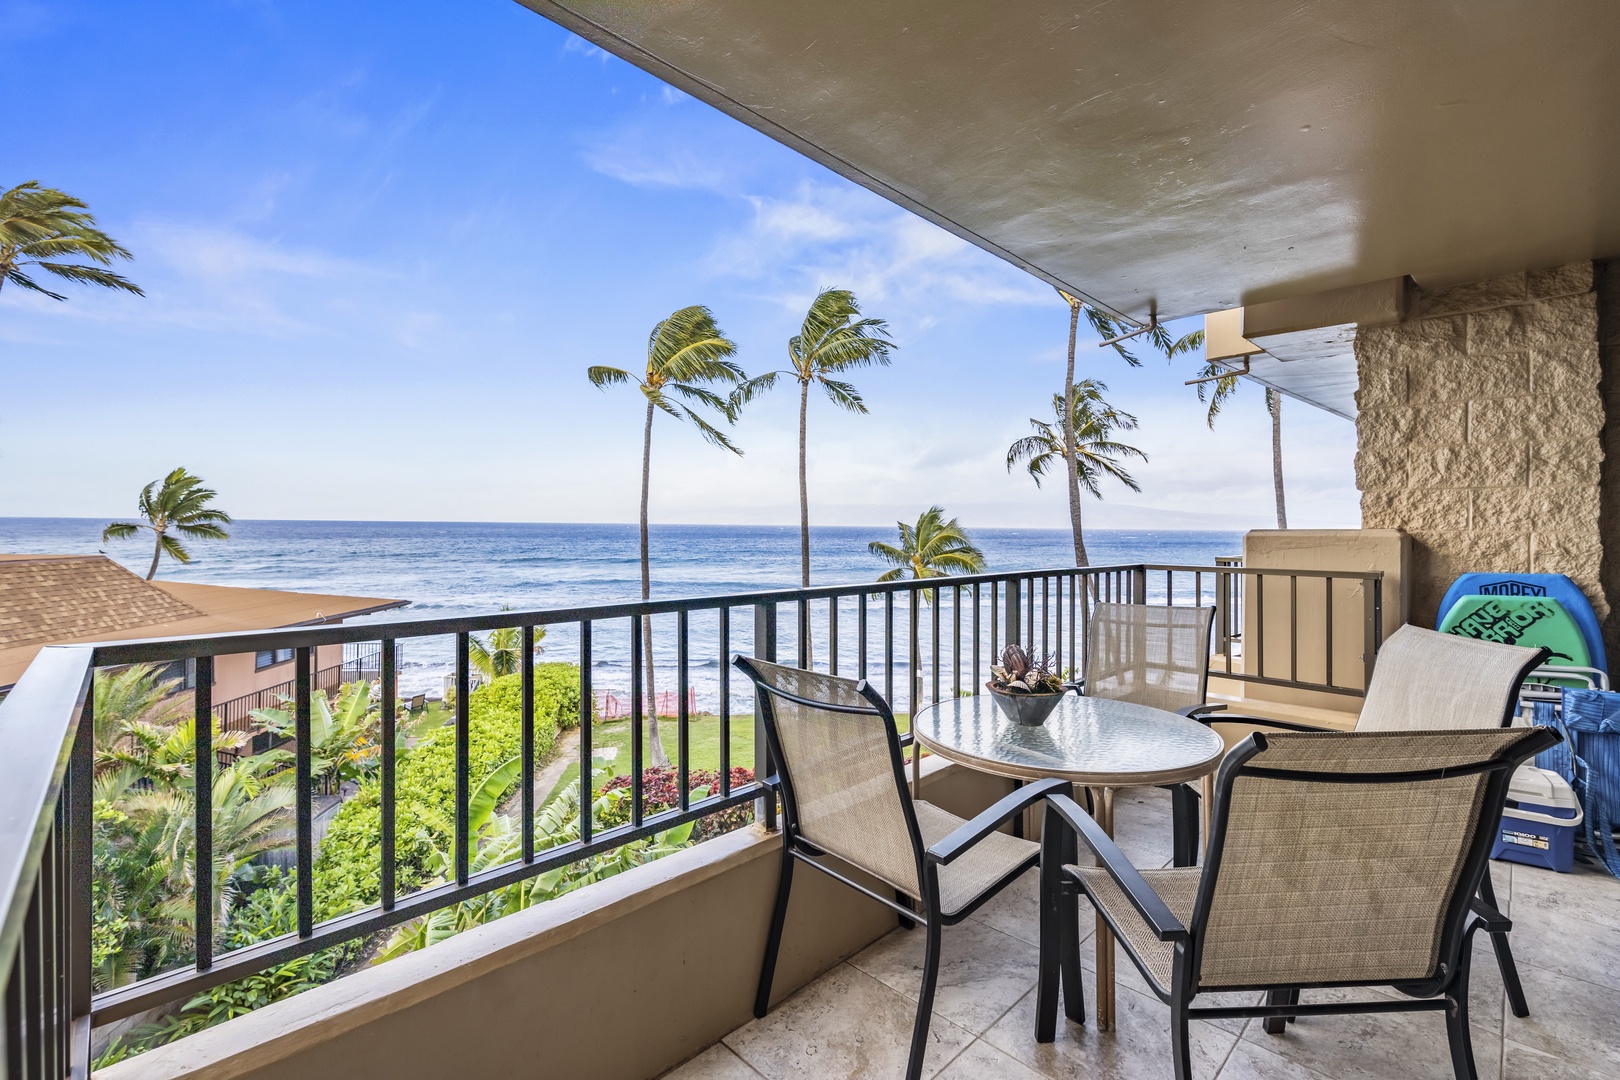 Revel in the ocean vista from the lanai